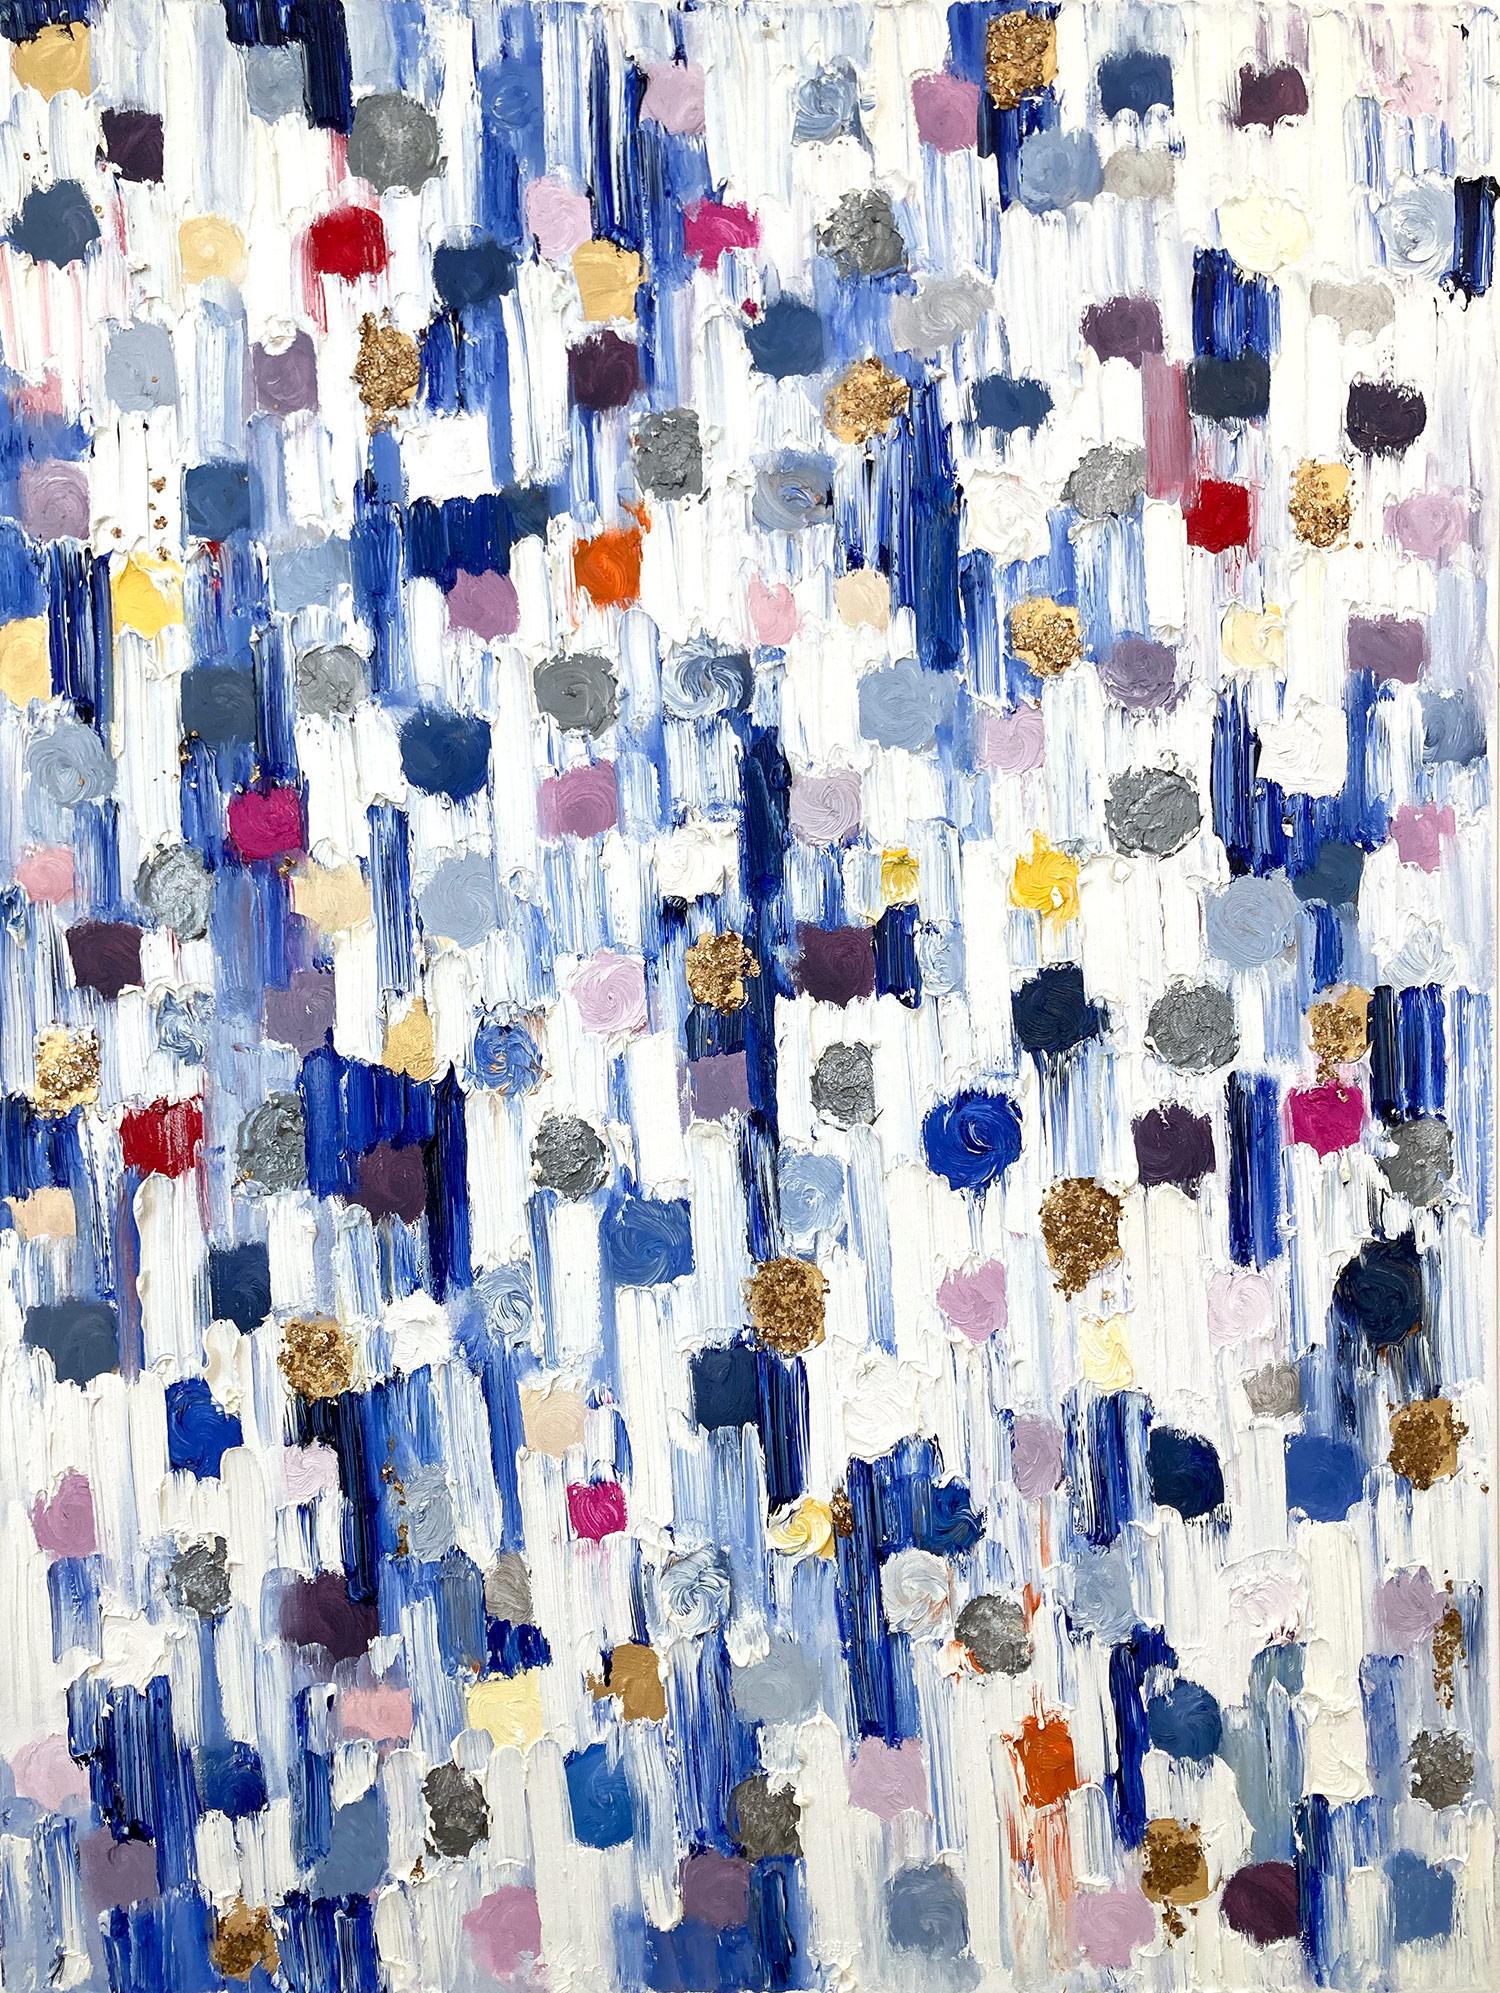 With layers of bright oils and whisking brush strokes, the paint is able to shine and shimmer in a very unique pattern. The artist uses thick textured oils and glass to add a very contemporary, urban feel. The “Dripping Dots” cascade down the canvas